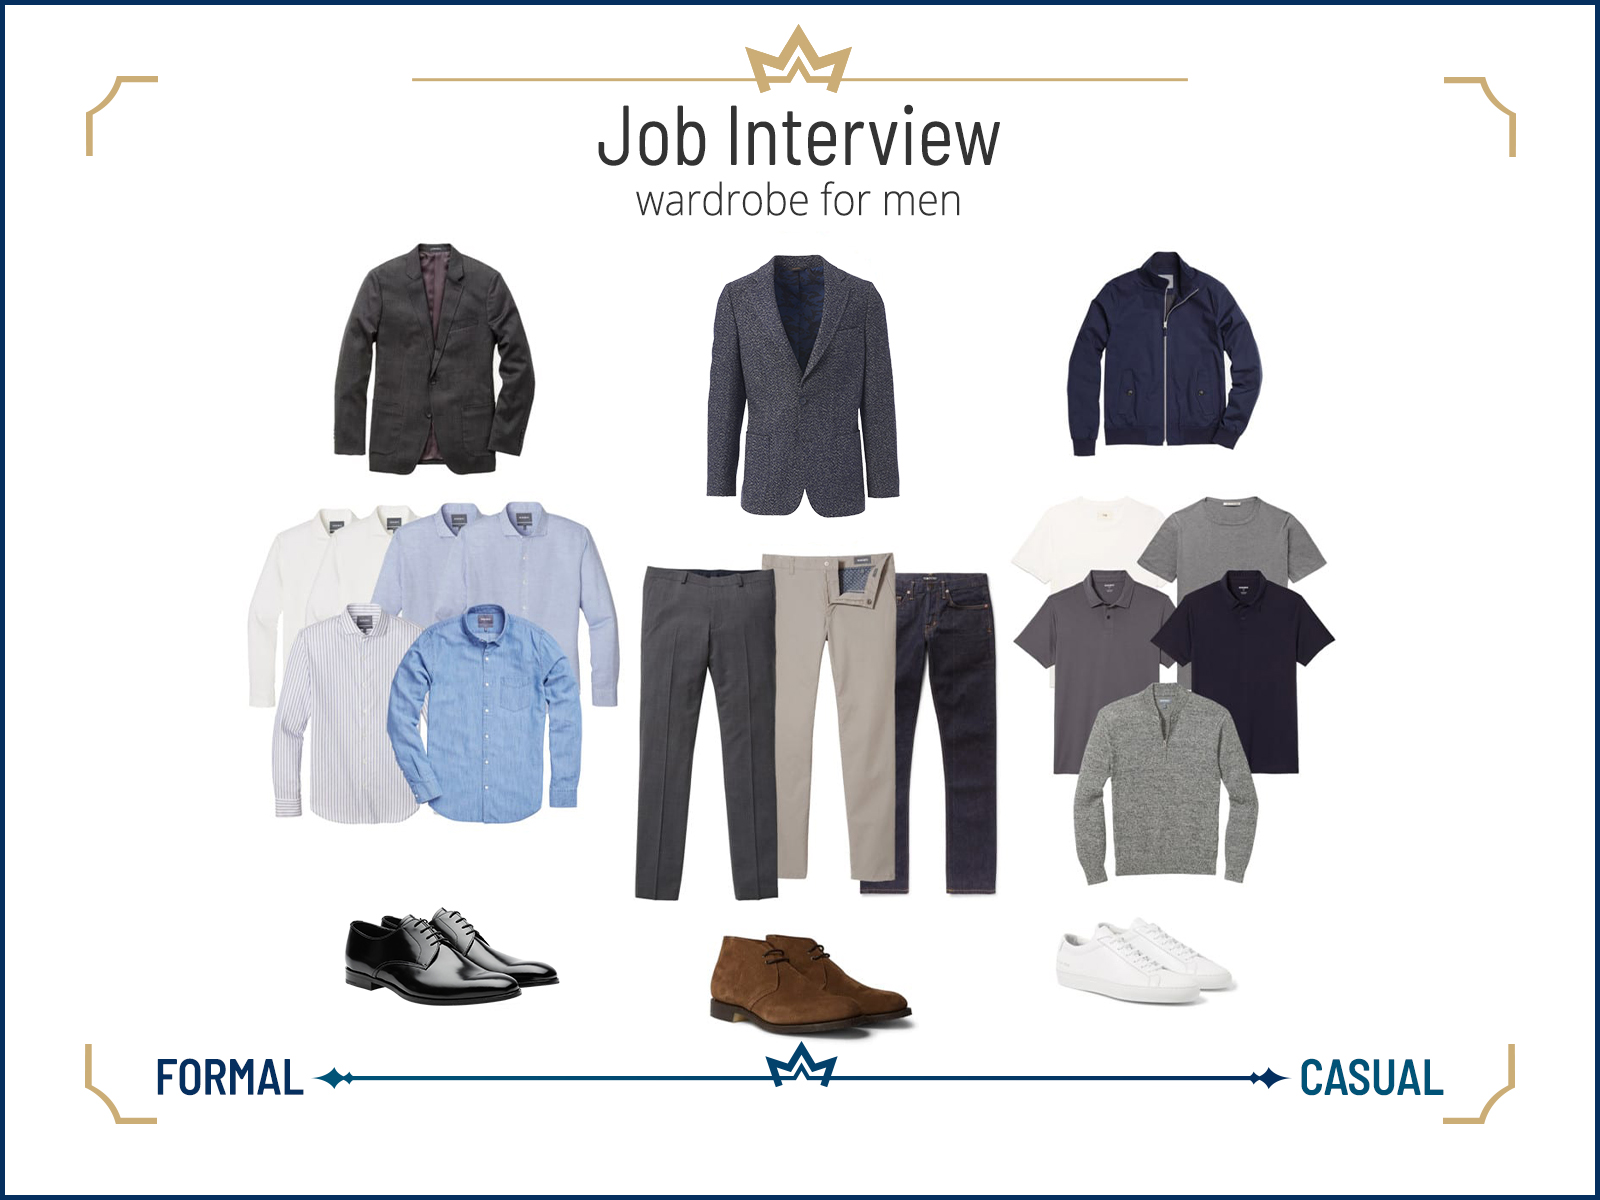 Different job interview outfits and wardrobes for men